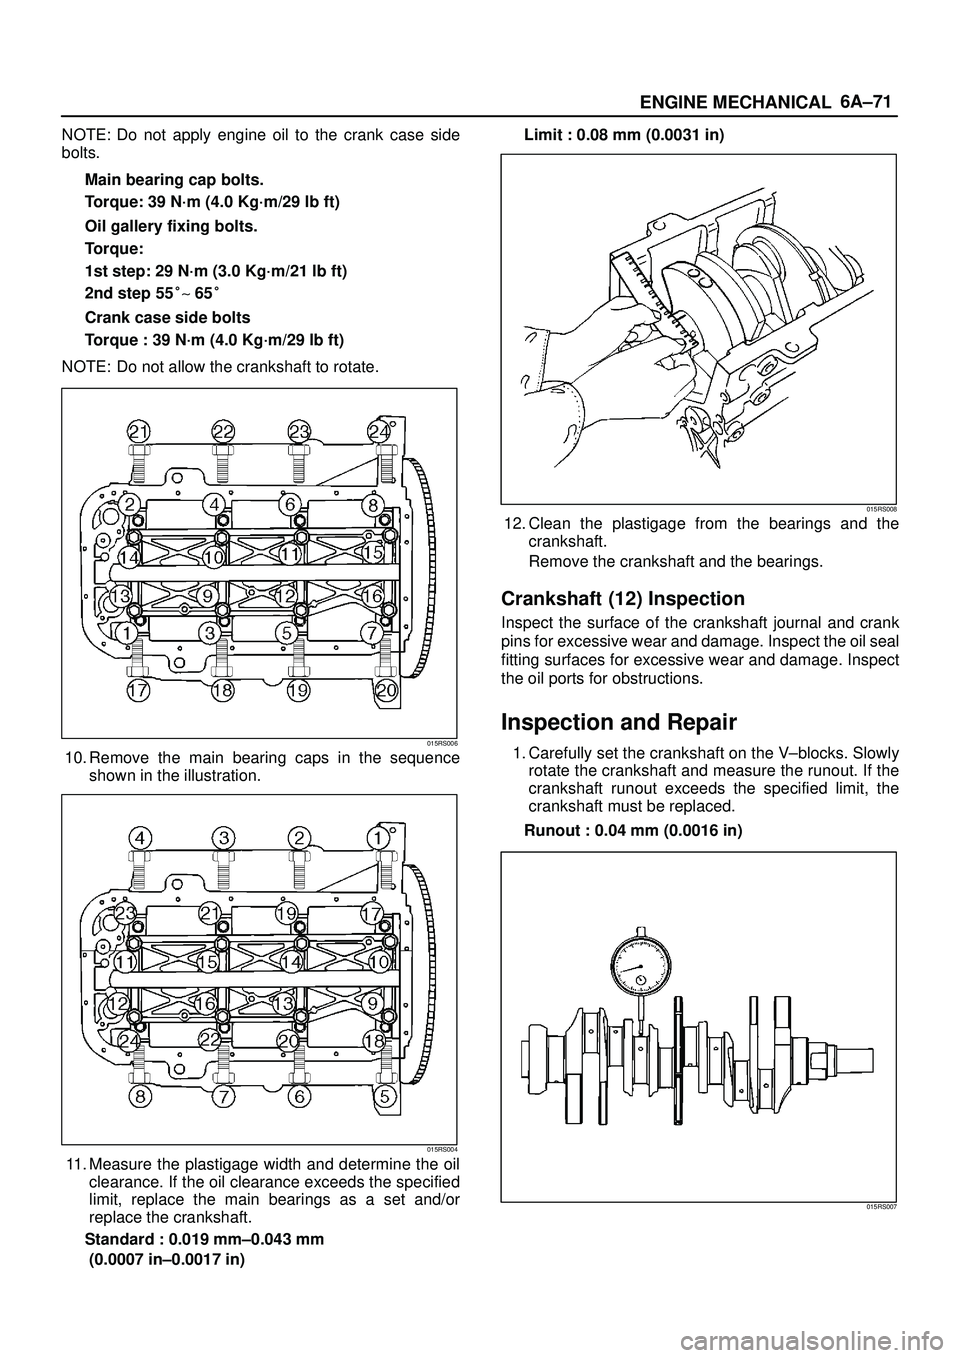 ISUZU TROOPER 1998  Service Repair Manual 6A±71
ENGINE MECHANICAL
NOTE: Do not apply engine oil to the crank case side
bolts.
Main bearing cap bolts.
Torque: 39 N´m (4.0 Kg´m/29 lb ft)
Oil gallery fixing bolts.
Torque:
1st step: 29 N´m (3